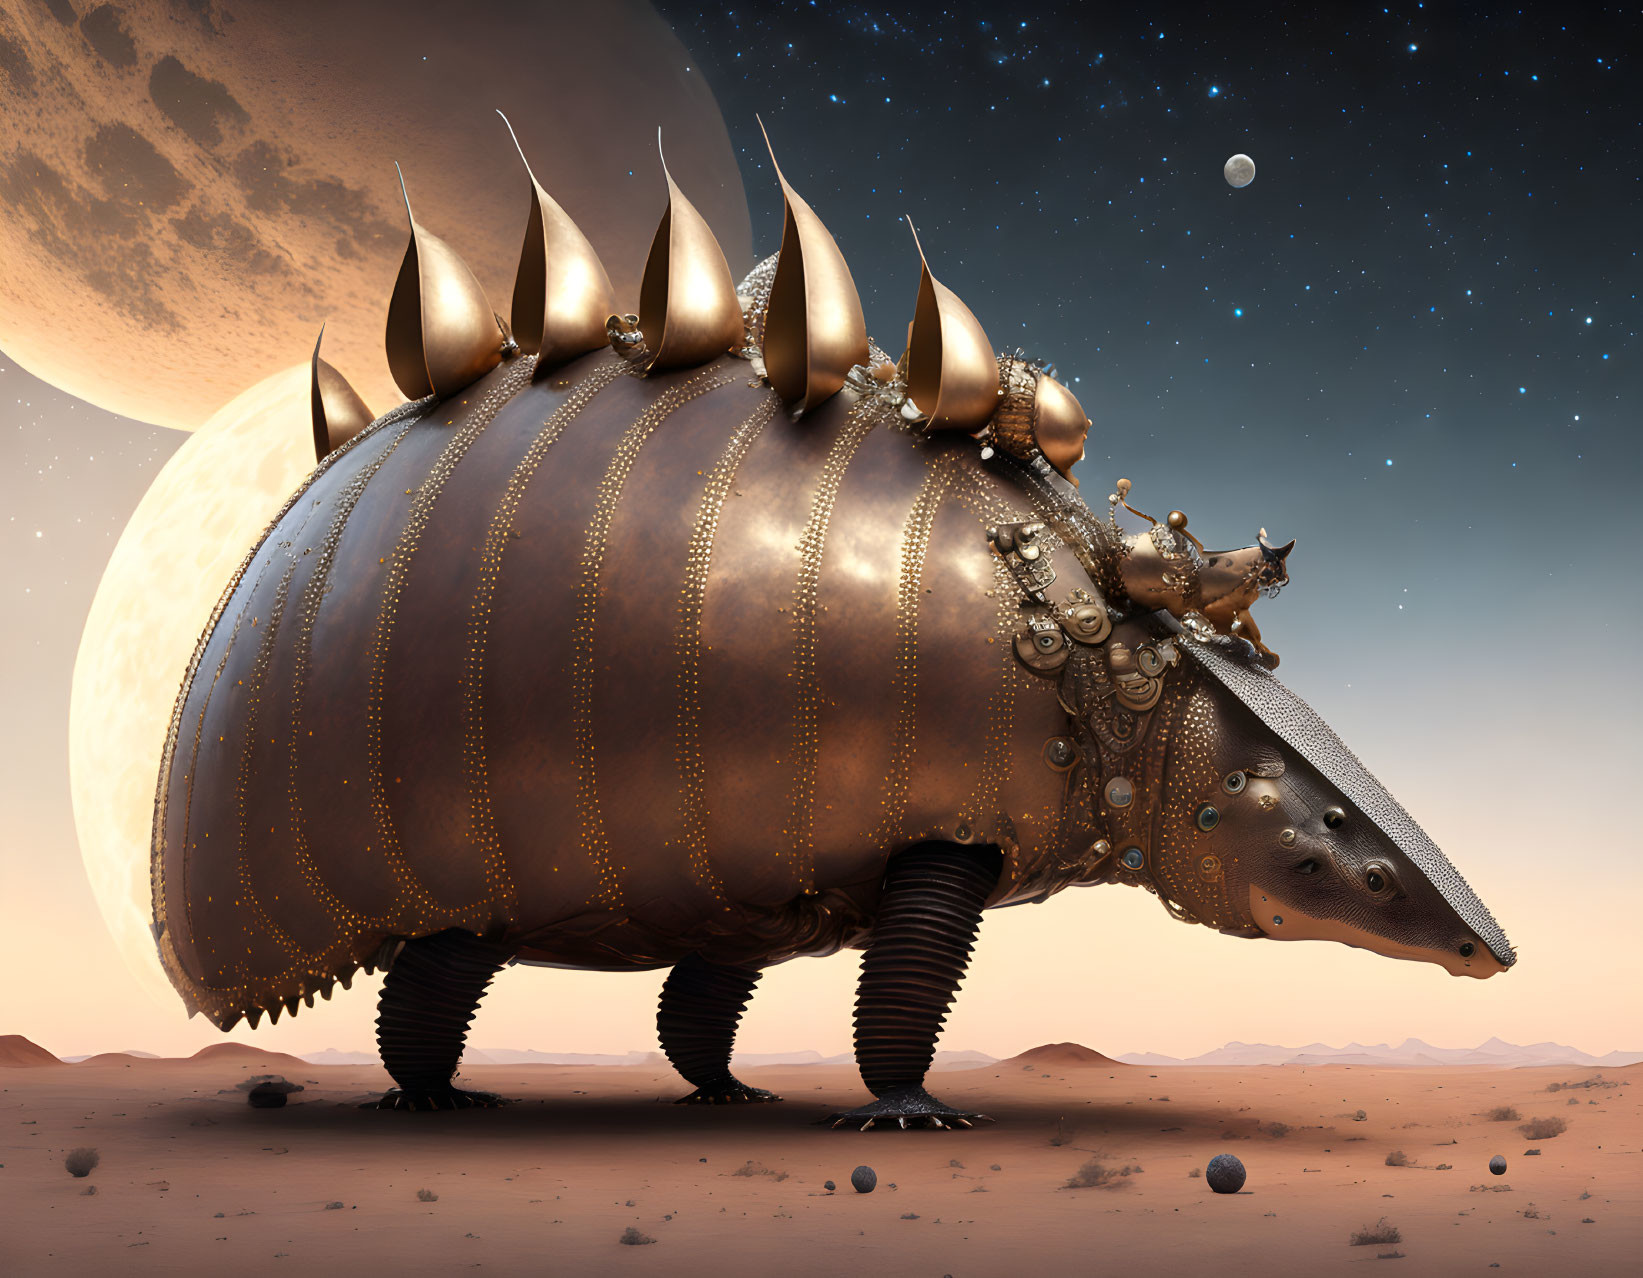 Armored rhinoceros with metallic plating and spikes under desert moon